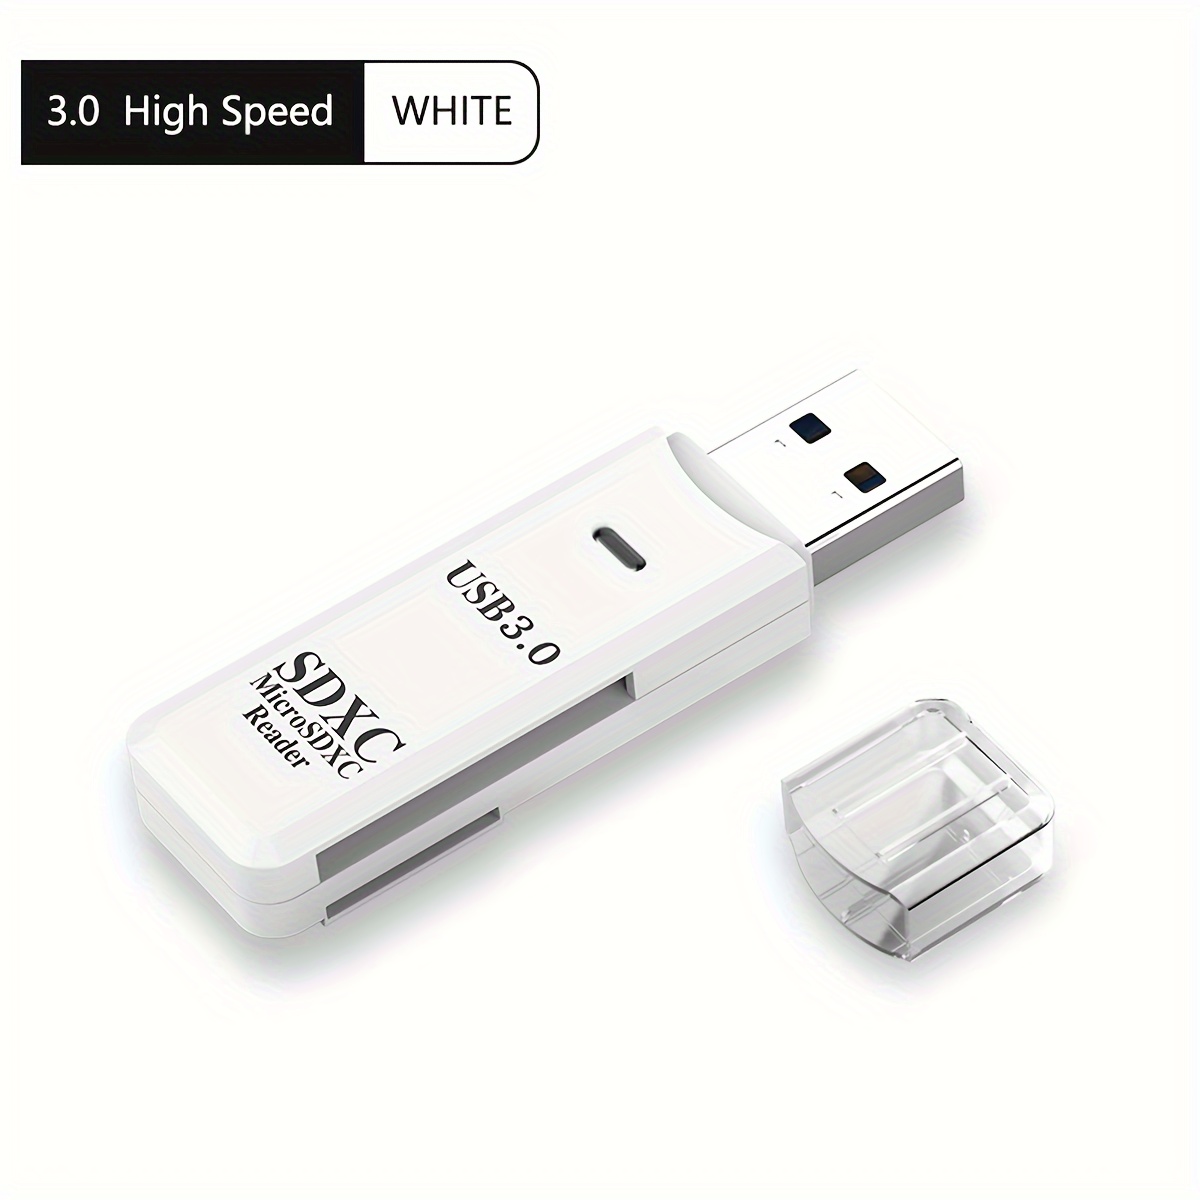 USB C Micro SD Memory Card Reader Adapter USB2.0 for SD/Micro sd Memory  Card Adapter for MicroSDXC and SDHC Card, SD, SDXC, SDHC, SD Cards, Works  for